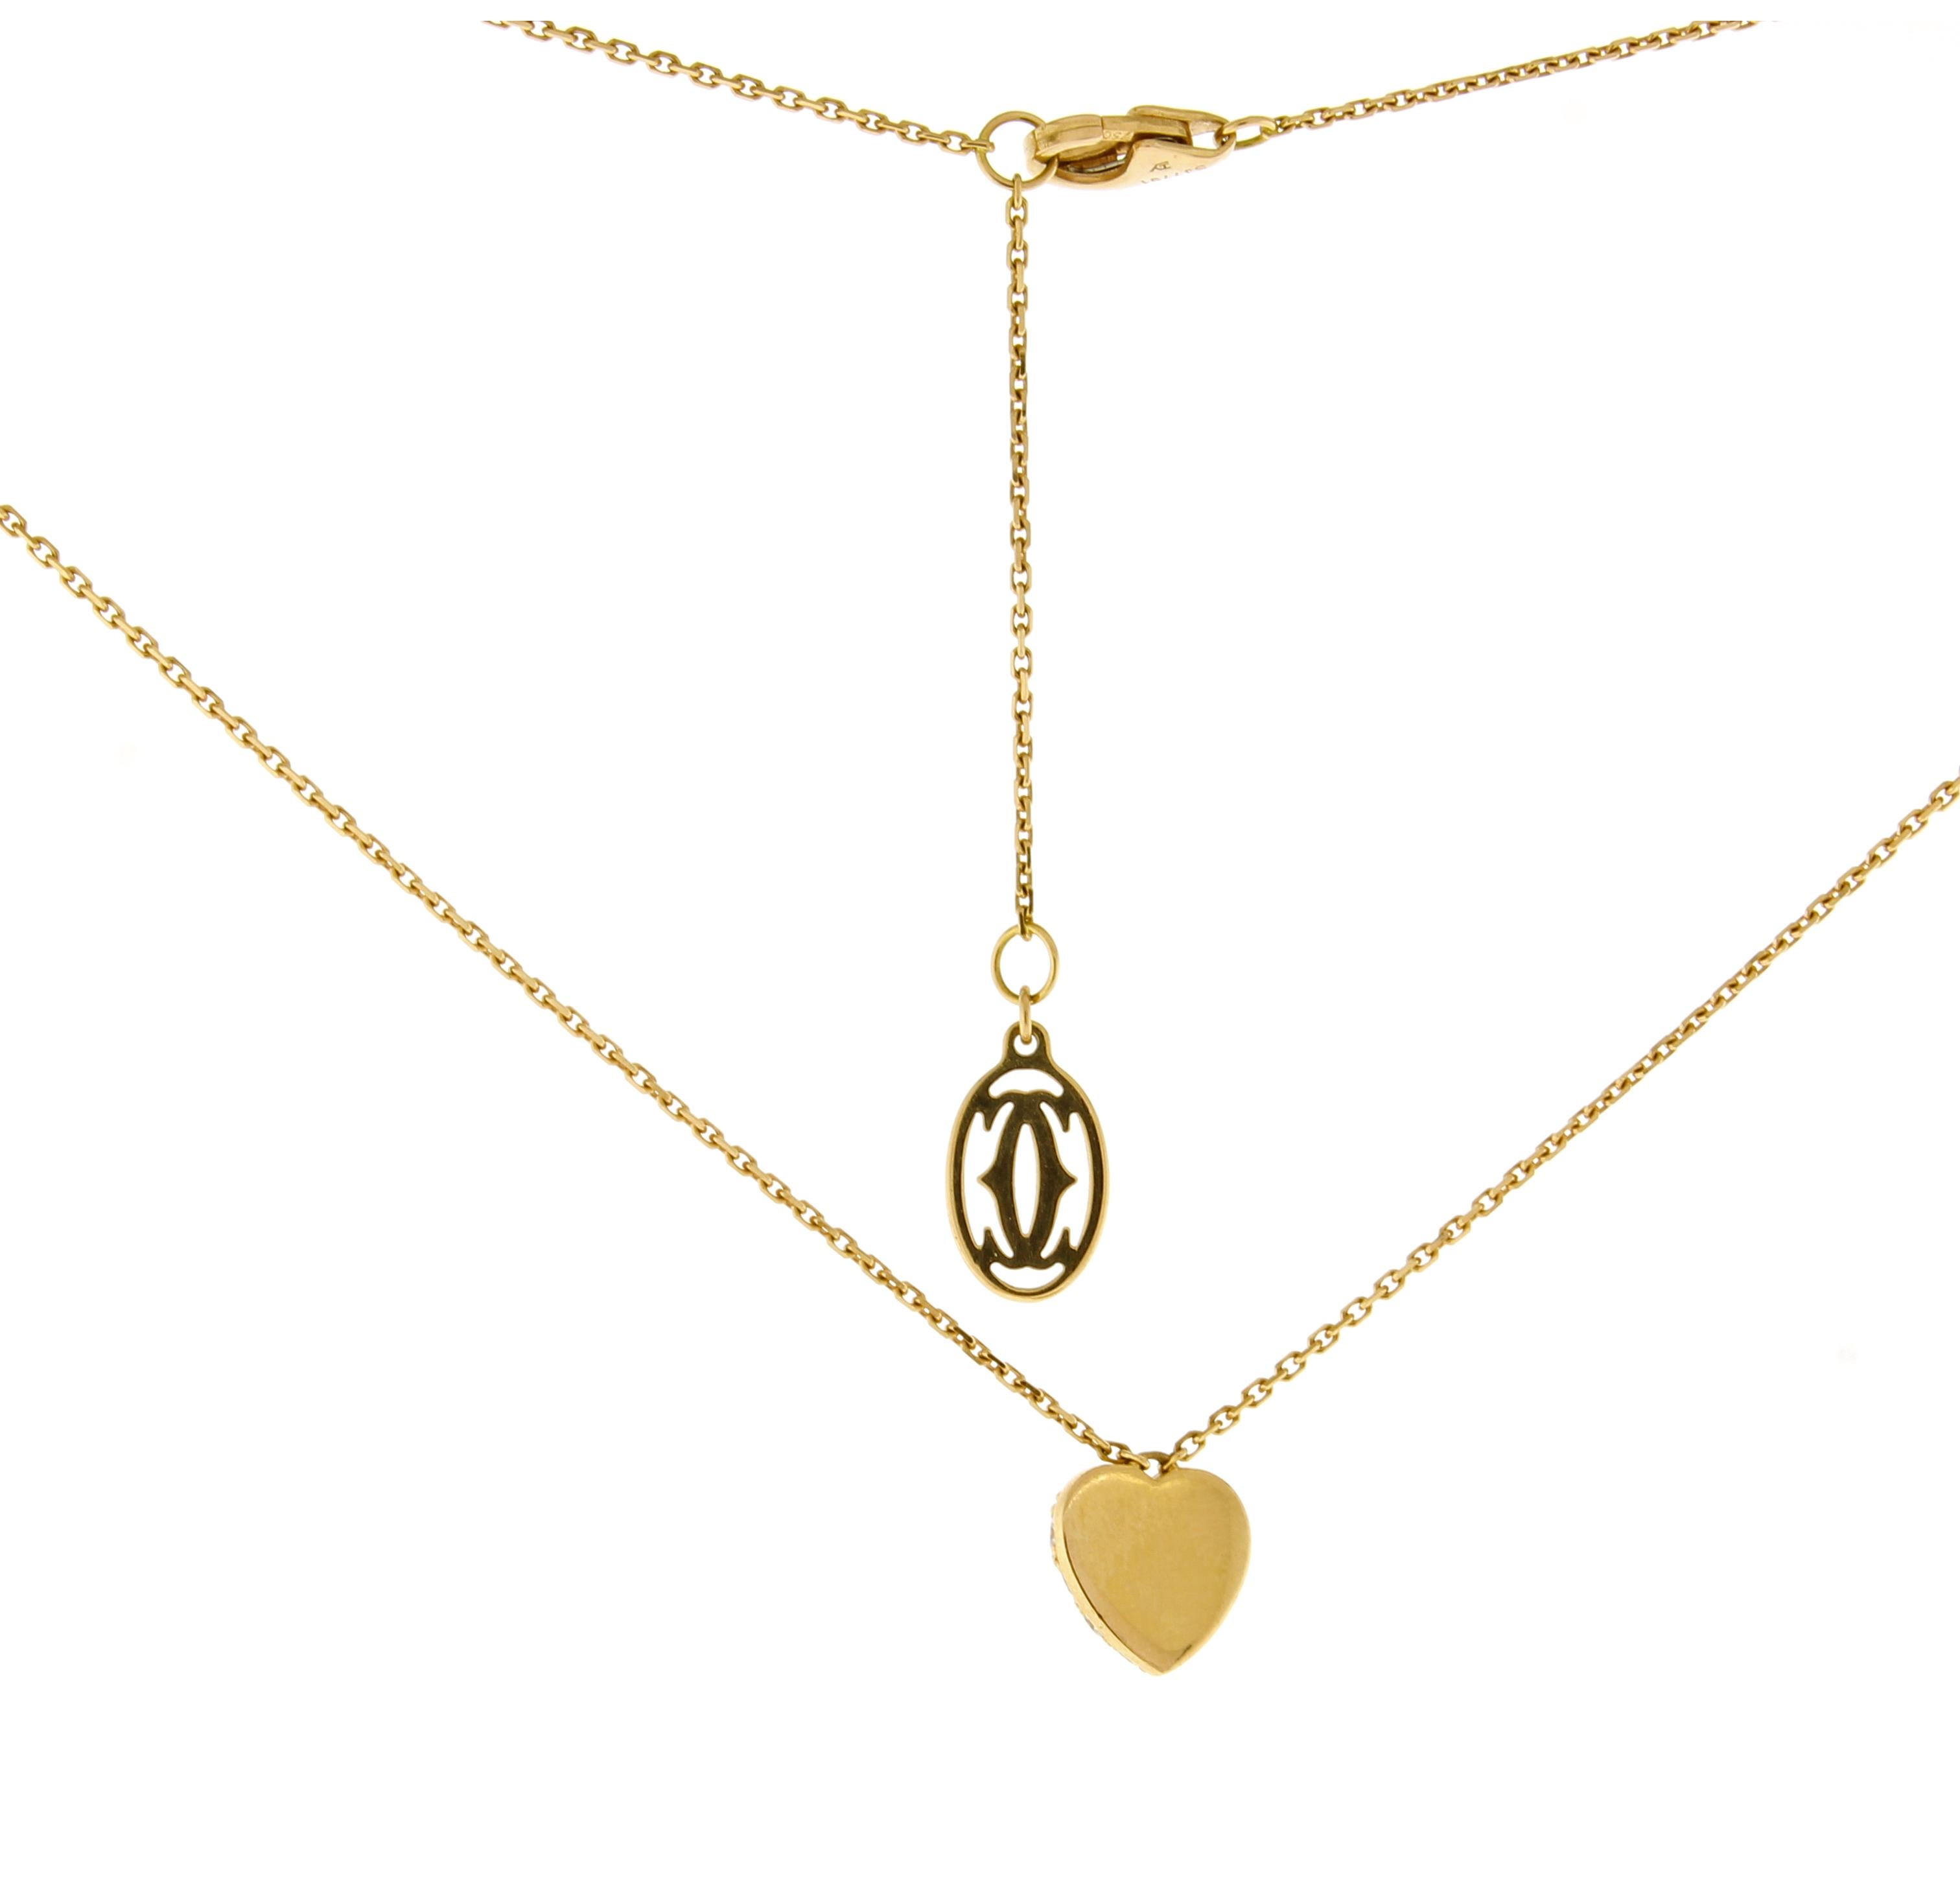 From Cartier, a small pavé diamond pendant necklace
♦ Designer: Cartier
♦ Metal: 18 karat
♦ 18 Diamonds=.45 carat, F-G VVS
♦ Heart 3/8th of an inch across
♦ Chain 16 inches adjustable to 14 ¼ 
♦ Packaging: Cartier box
♦ Condition: Excellent ,